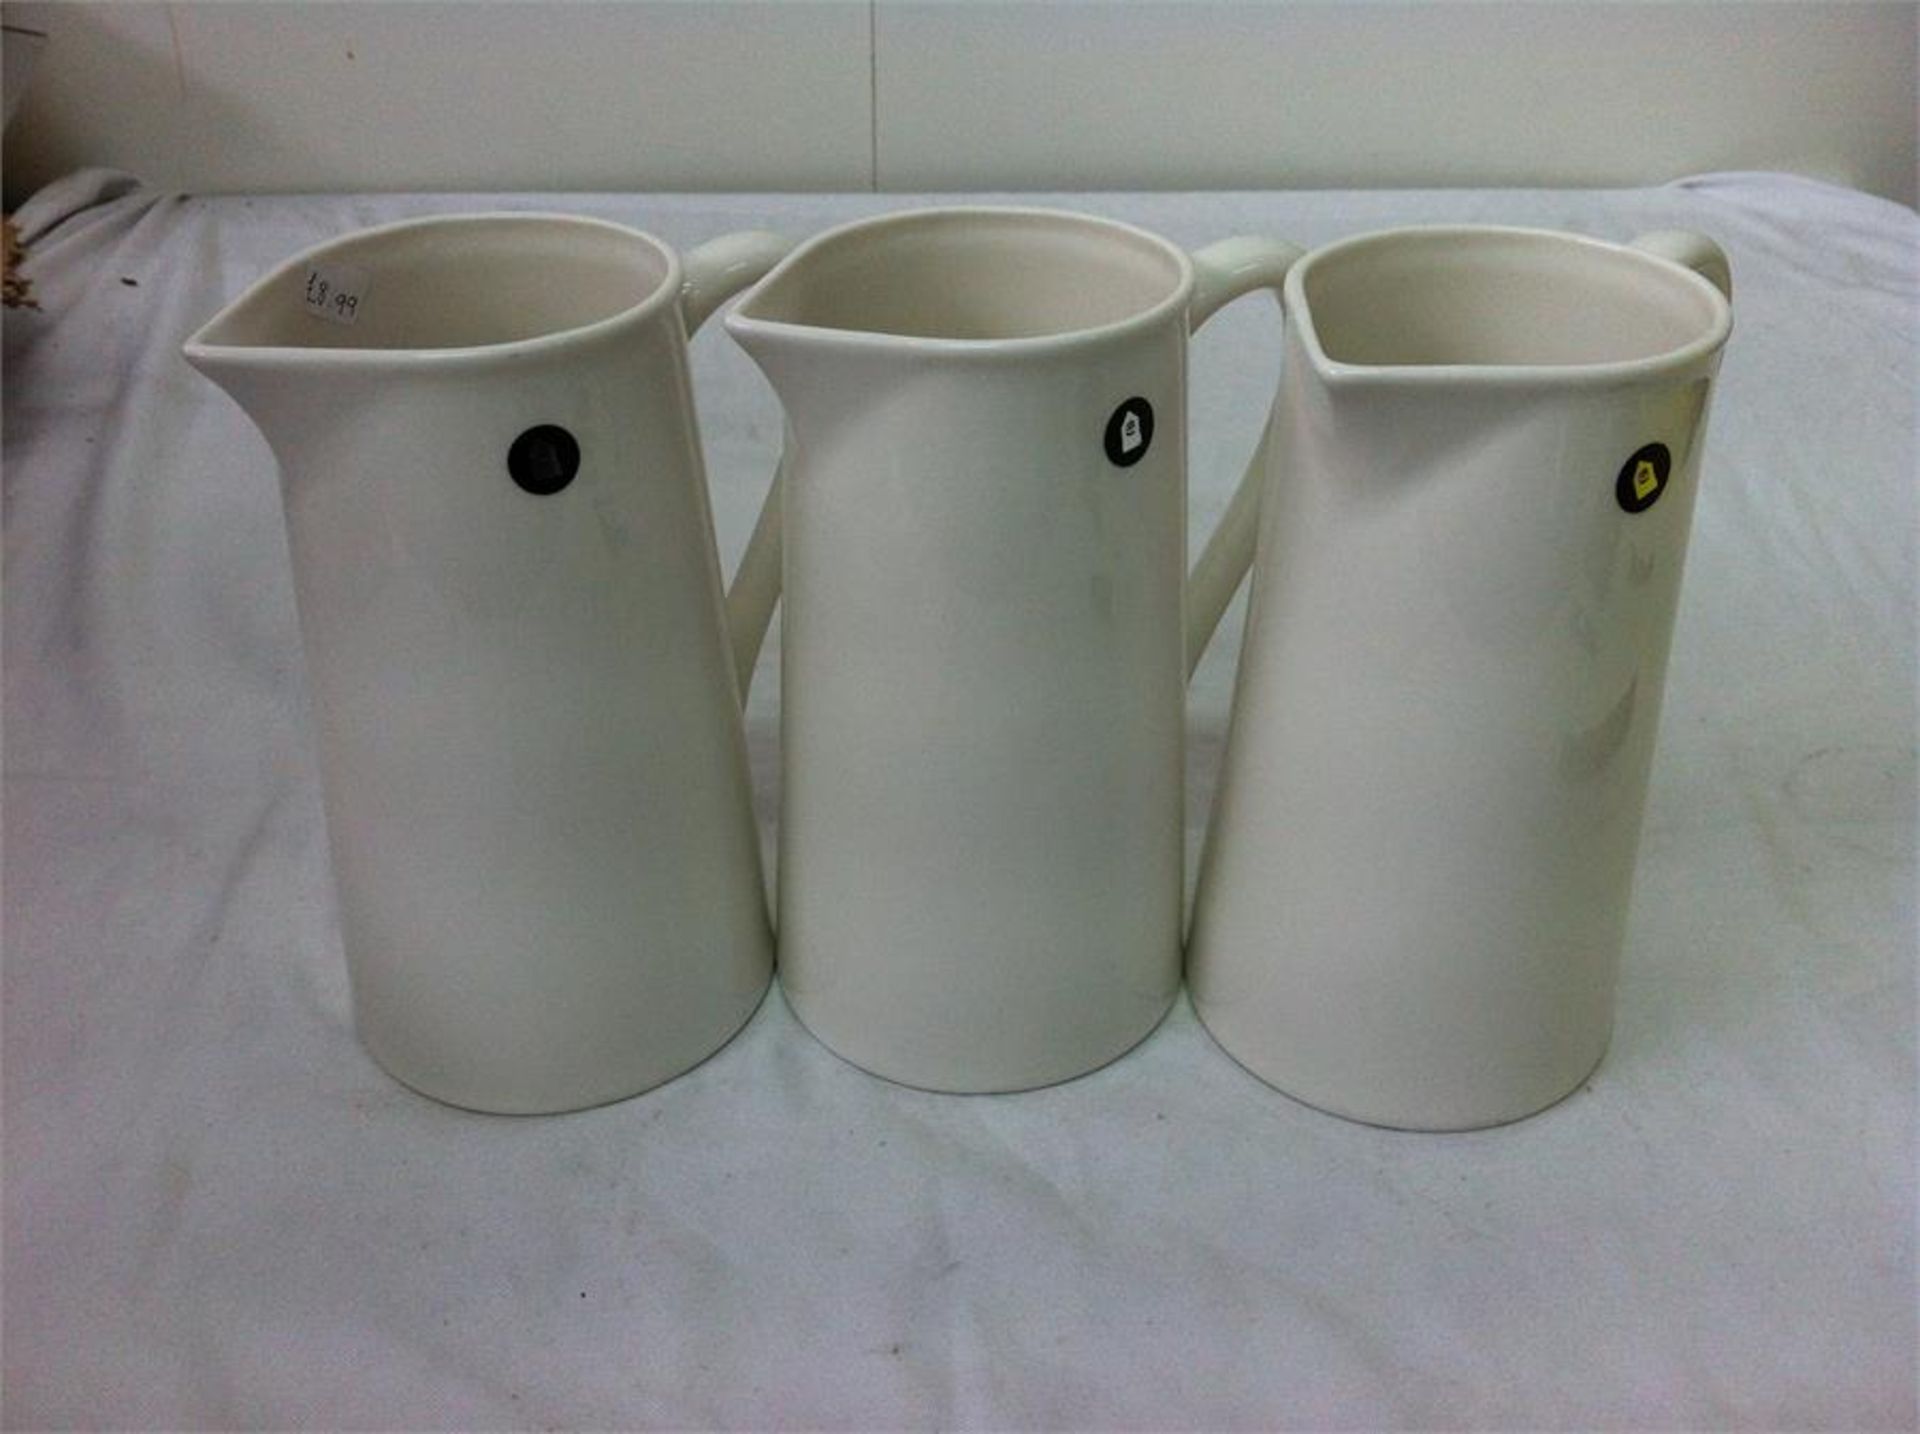 20 small and 6 large ceramic teapots, 3 blue enamel coated coffee pots, 3 white ceramic jugs - Image 3 of 6